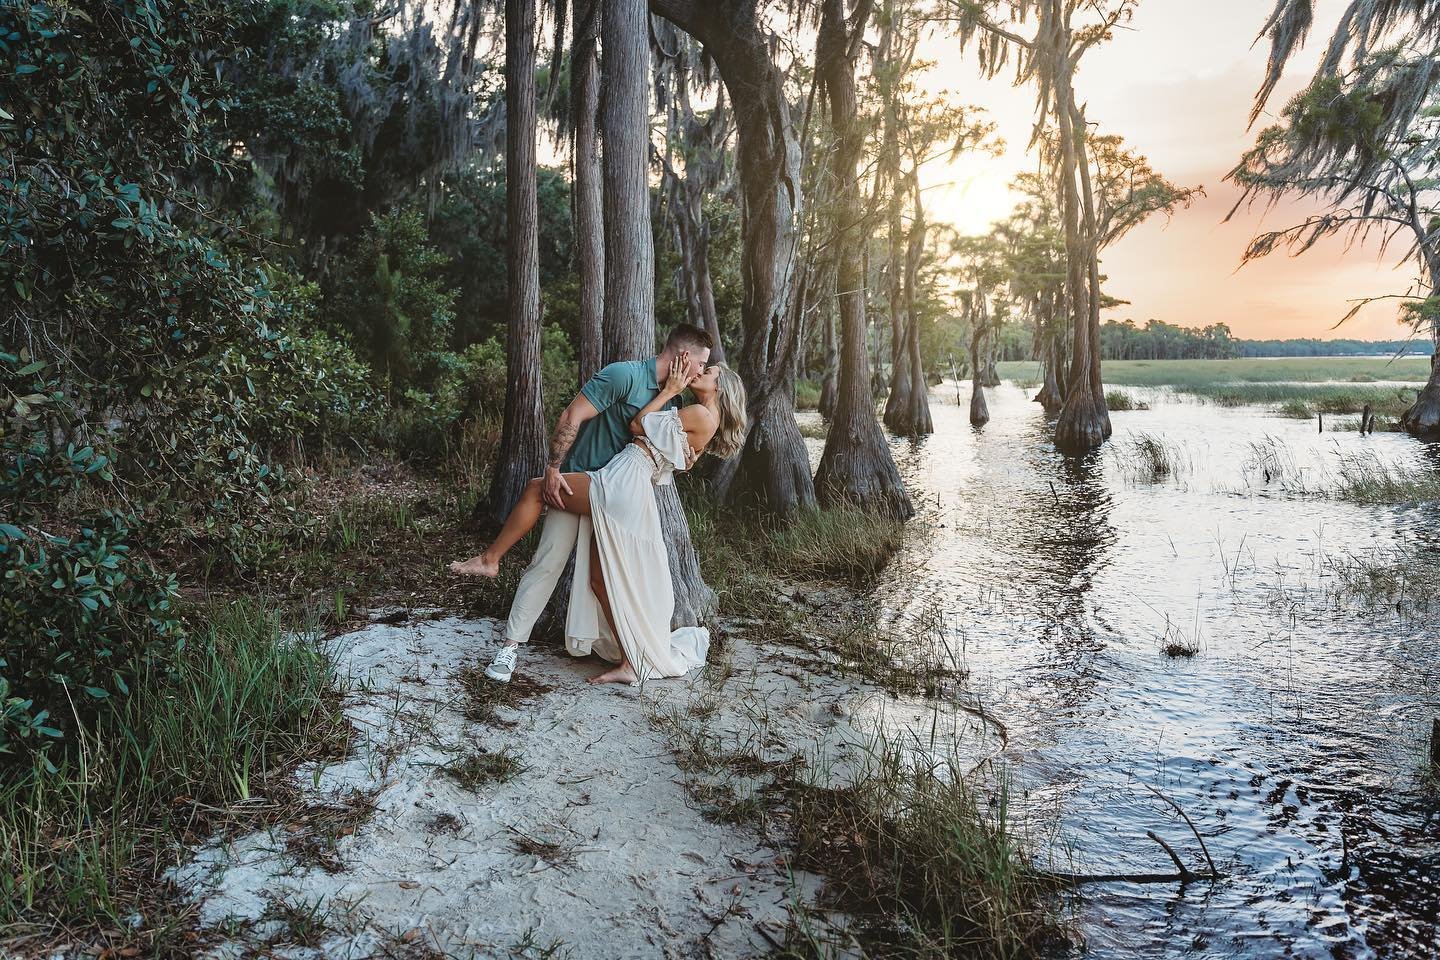 I was already excited for Zach &amp; Ellie&rsquo;s wedding but after last nights engagement sesh&hellip;. 🔥🔥🔥 
Ellie&rsquo;s outfit avail in my client closet too! 
@elliehunter._ 

#floridaweddingphotographer #floridawedding #engagement #orlandoen